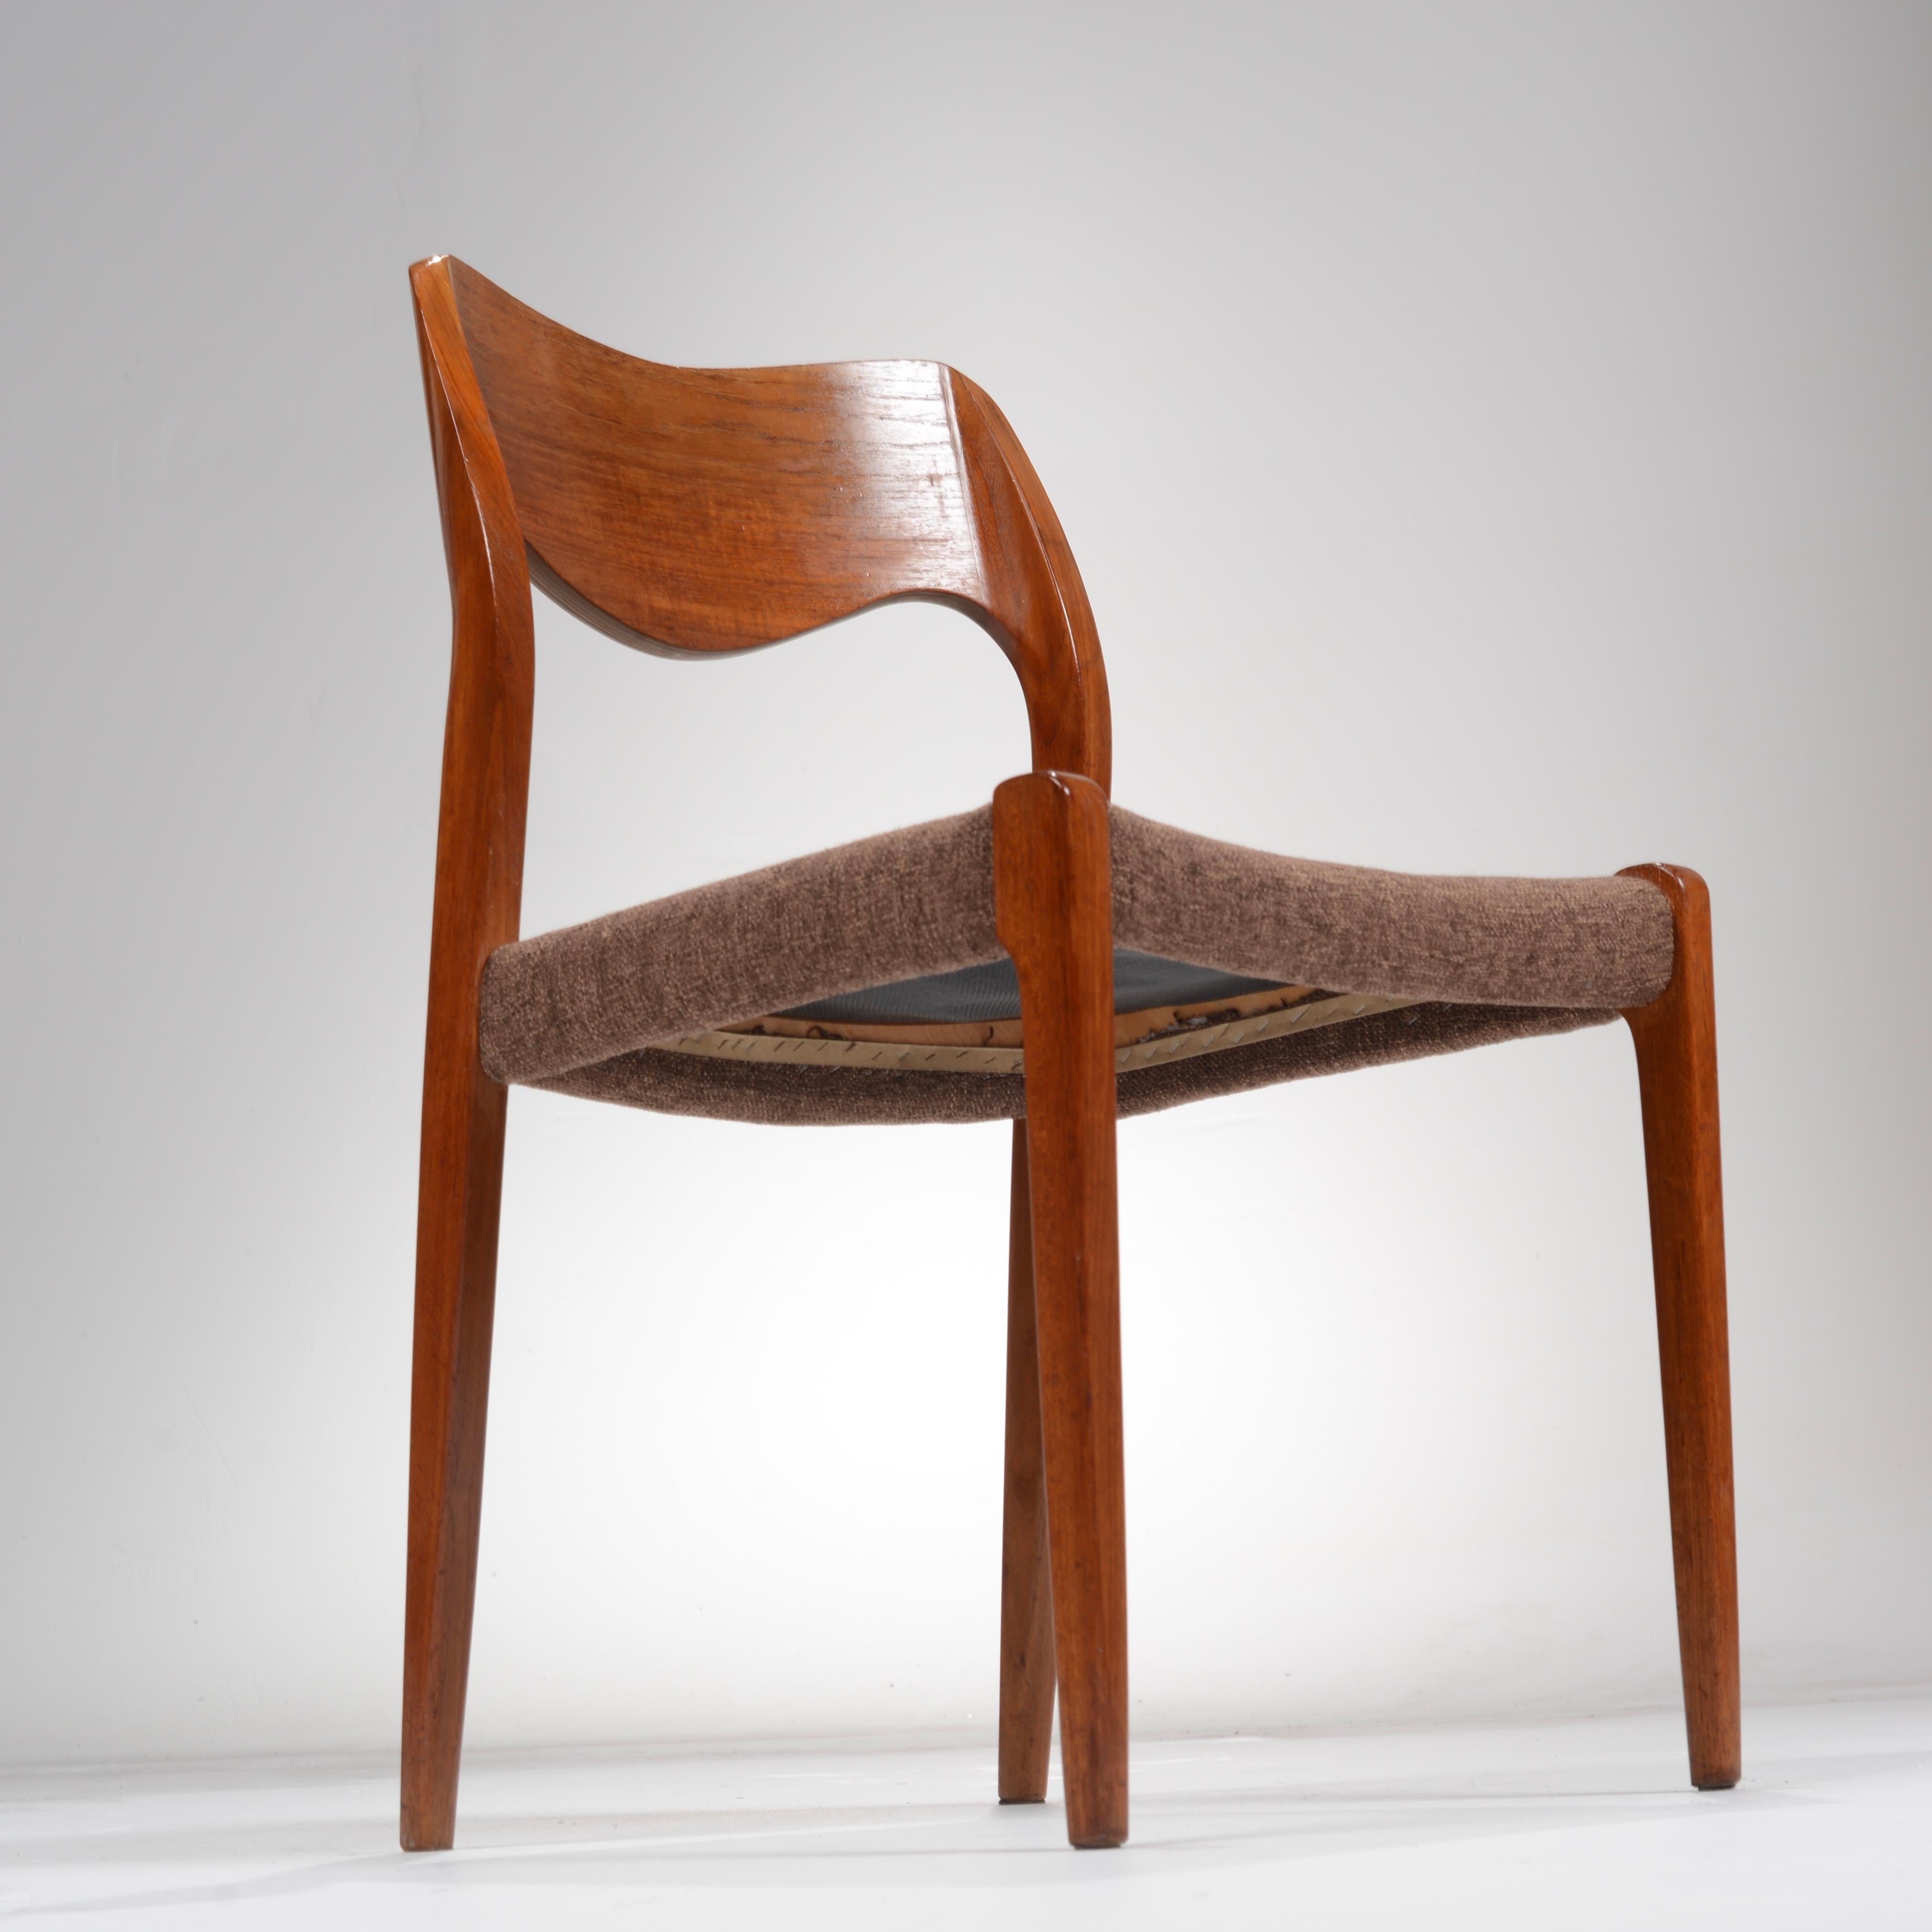 10 teak dining chairs designed by Niels Otto Møller for J. L. Møllers Møbelfabrik. The model 71 dates to 1968 and is an exceptional chair offering a very comfortable posture and the warm modern look typical of great Danish design. Newly upholstered